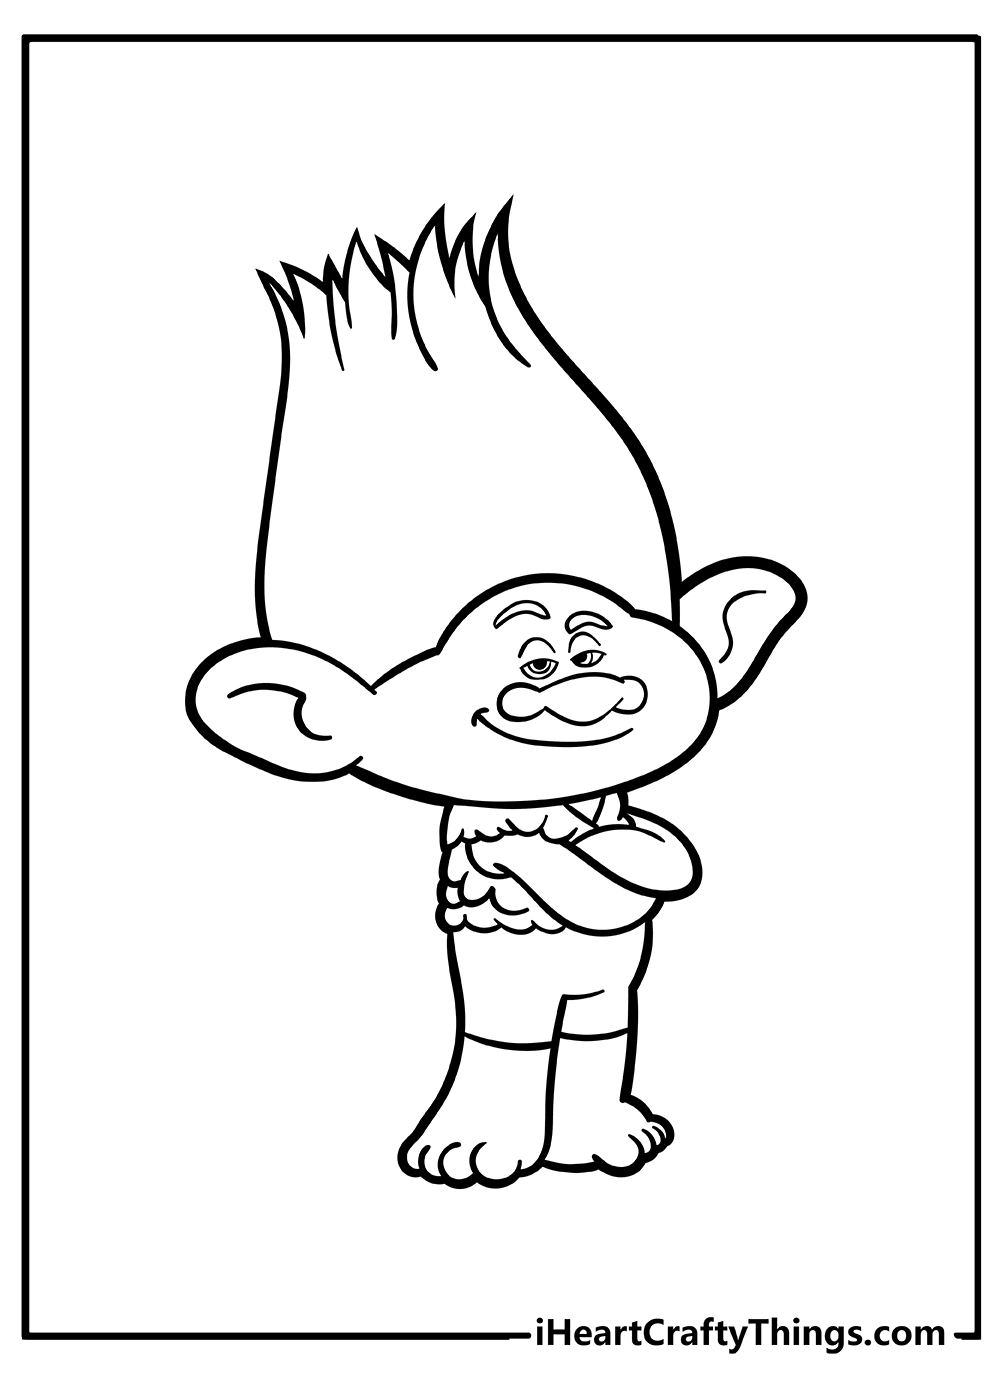 Troll Coloring Pages for kids free download